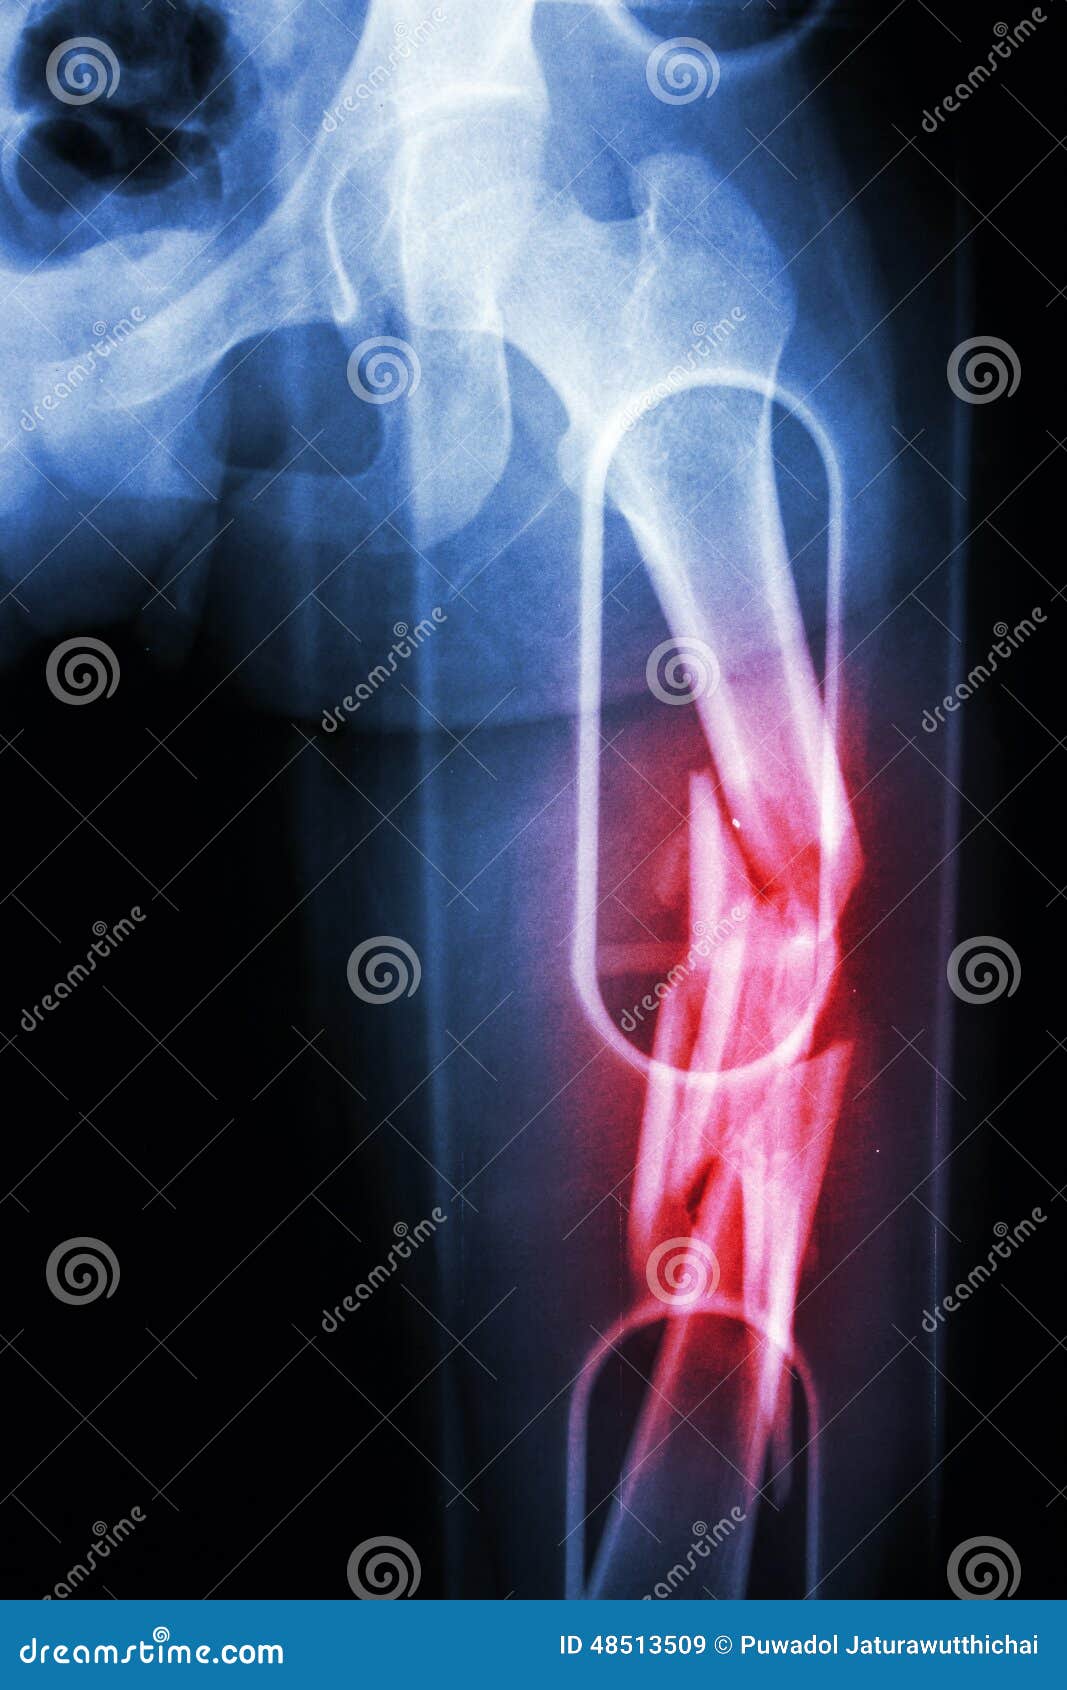 film x-ray show comminute fracture shaft of femur (thigh bone). it was spliced